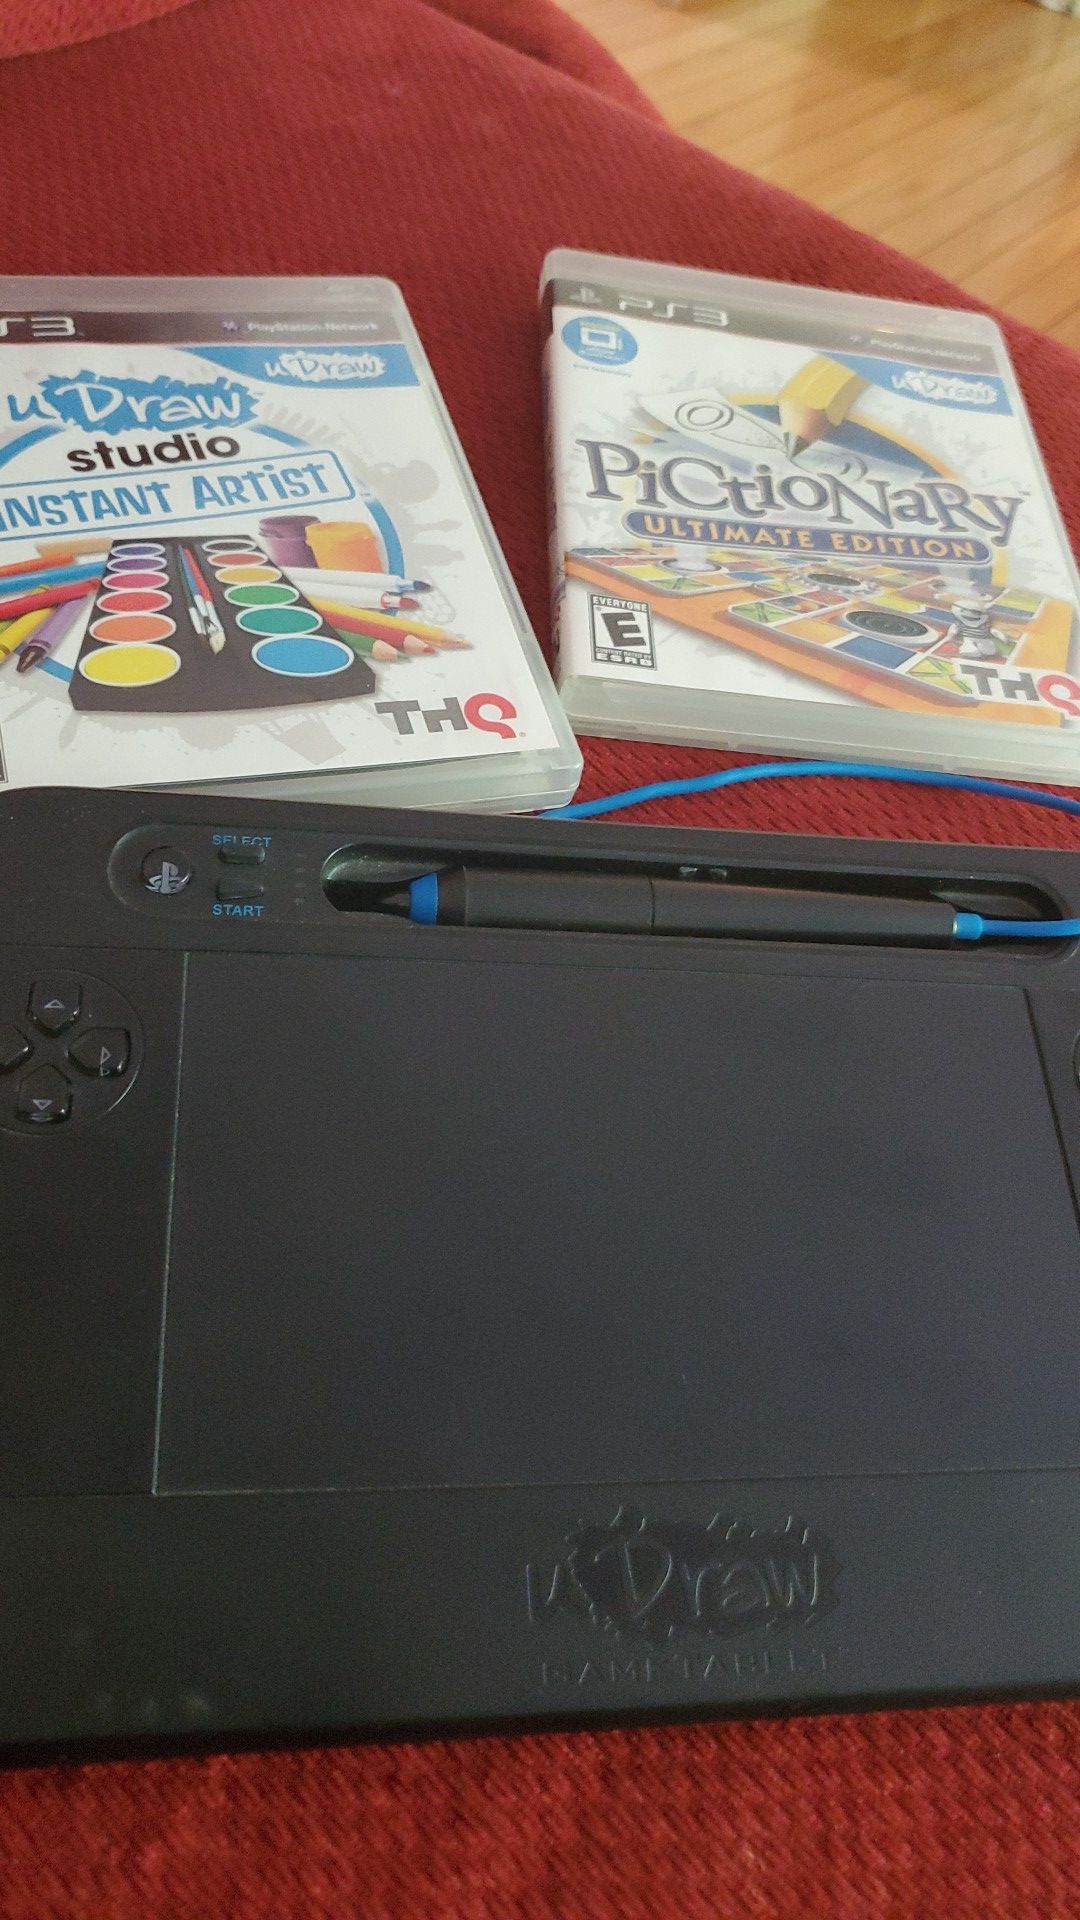 Pictonary ps3 tablet and games